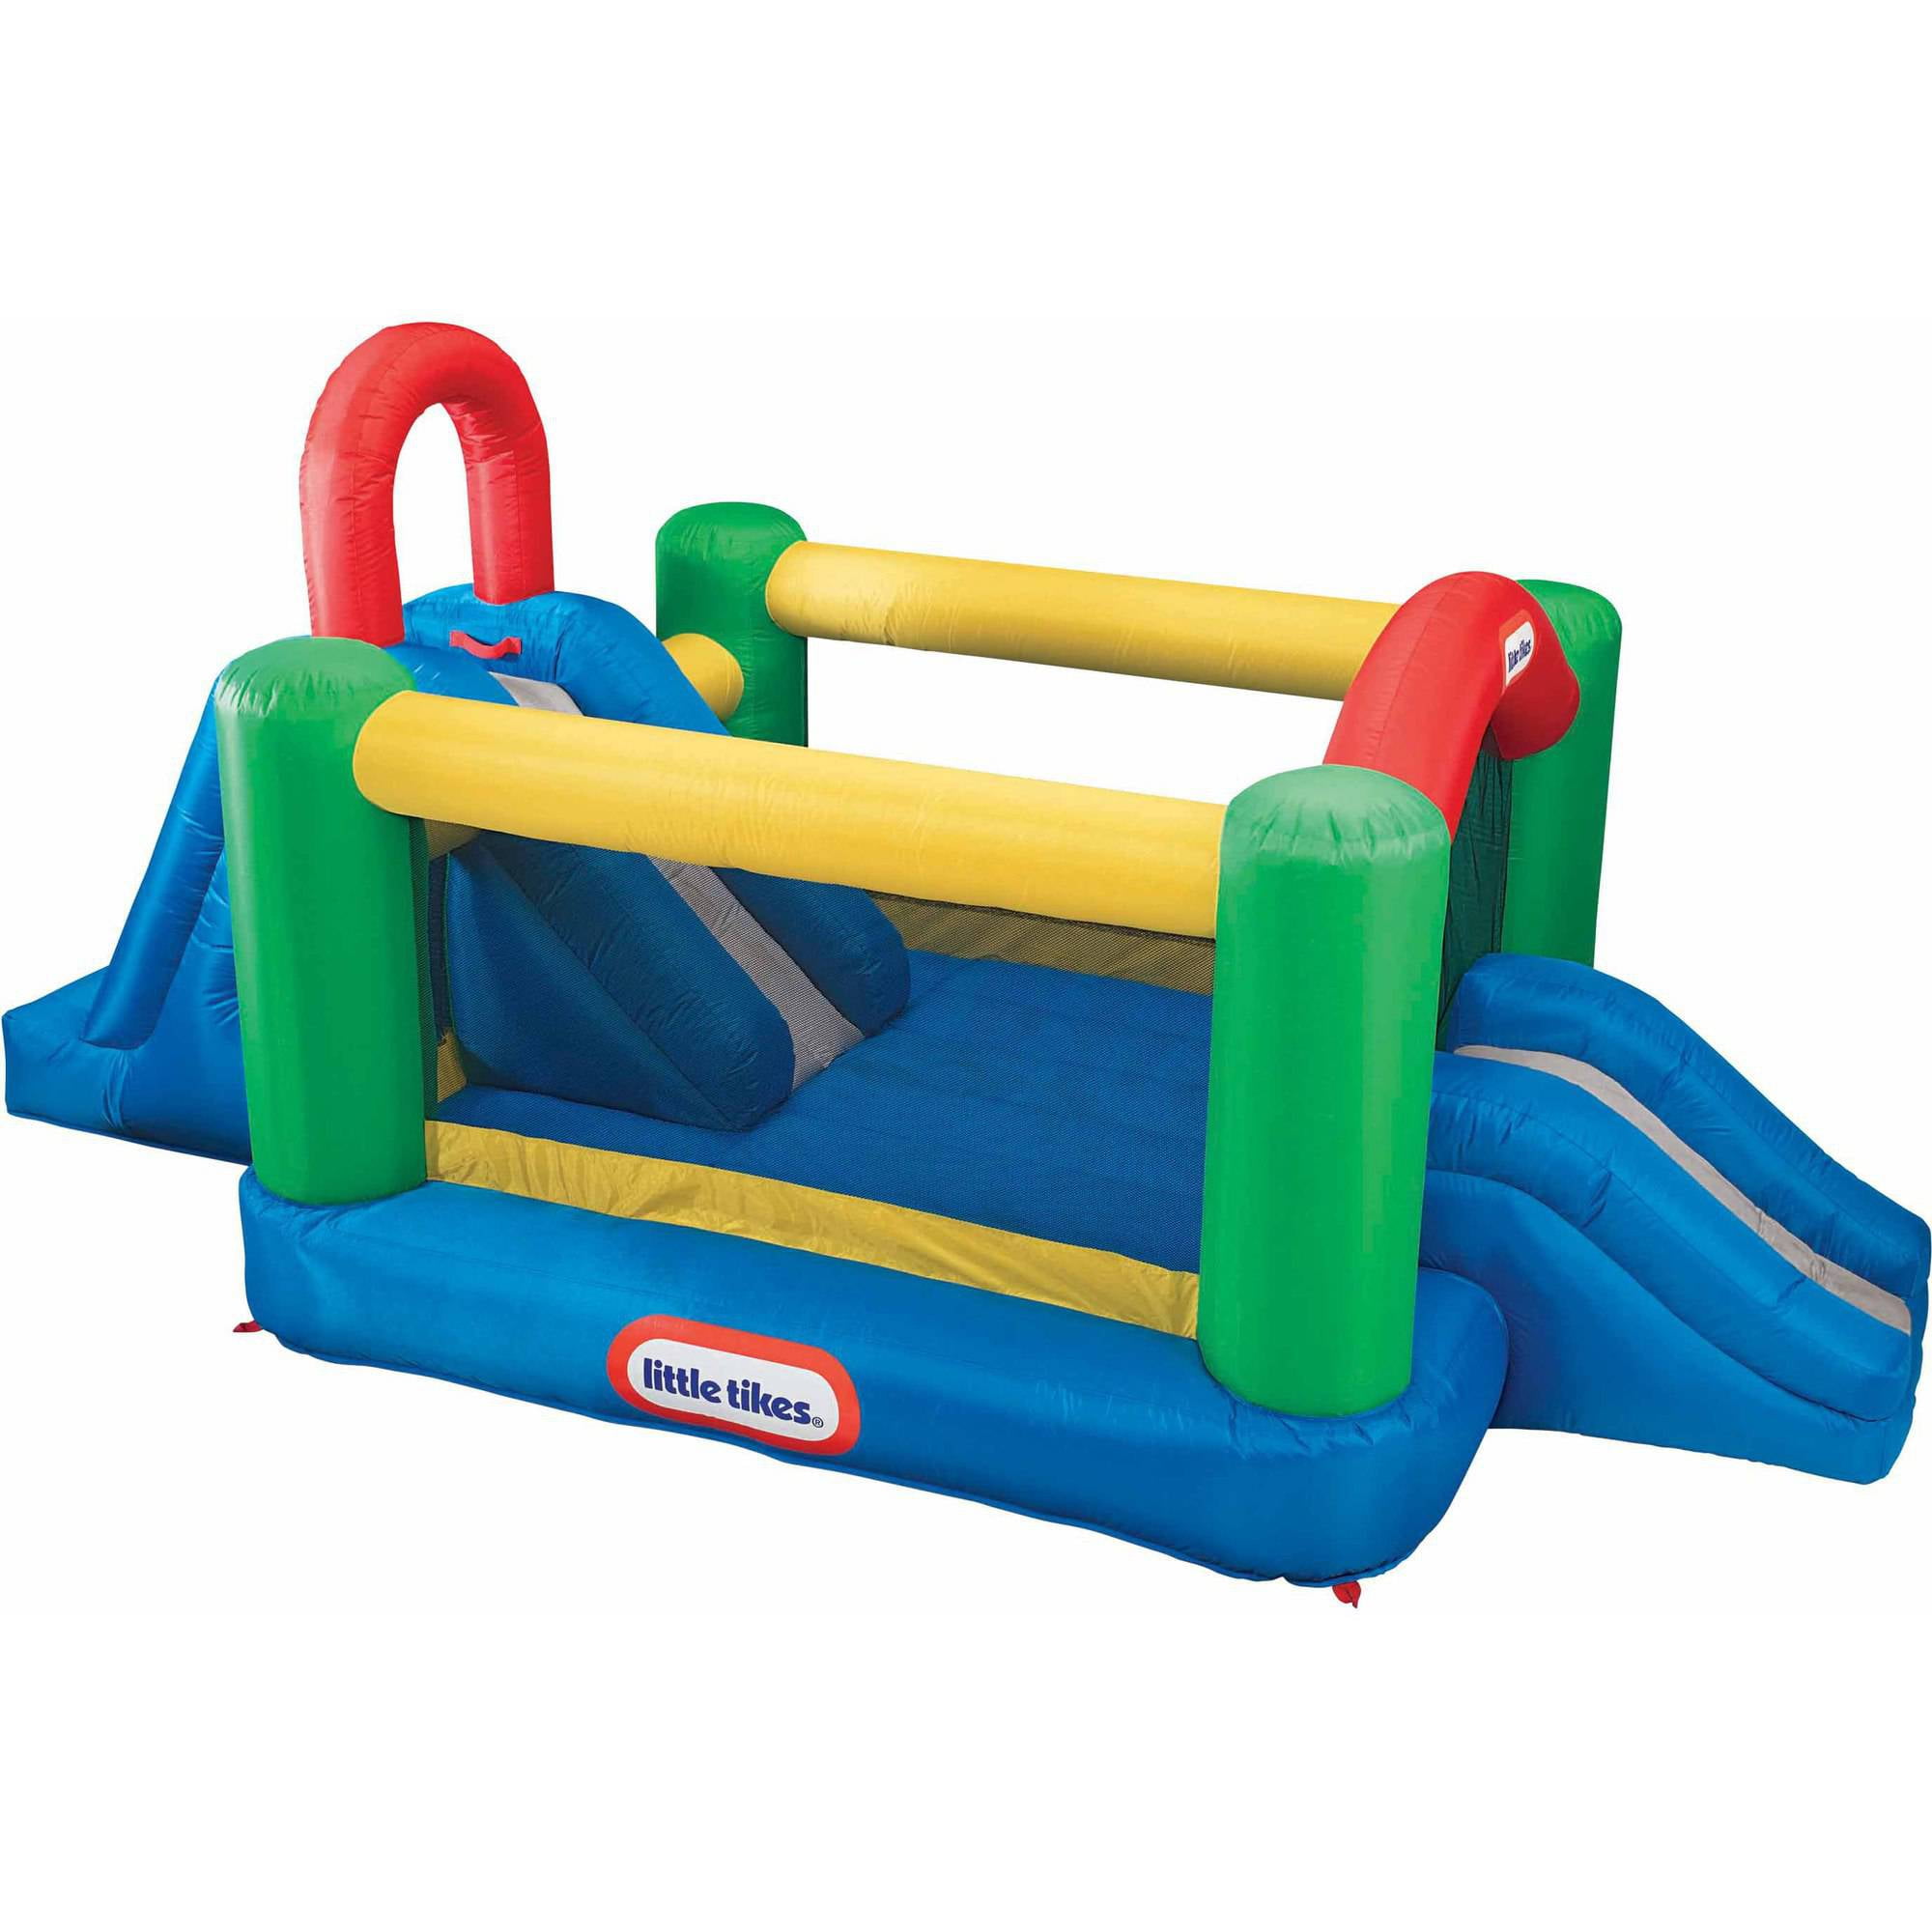 little tikes jump and slide bouncer